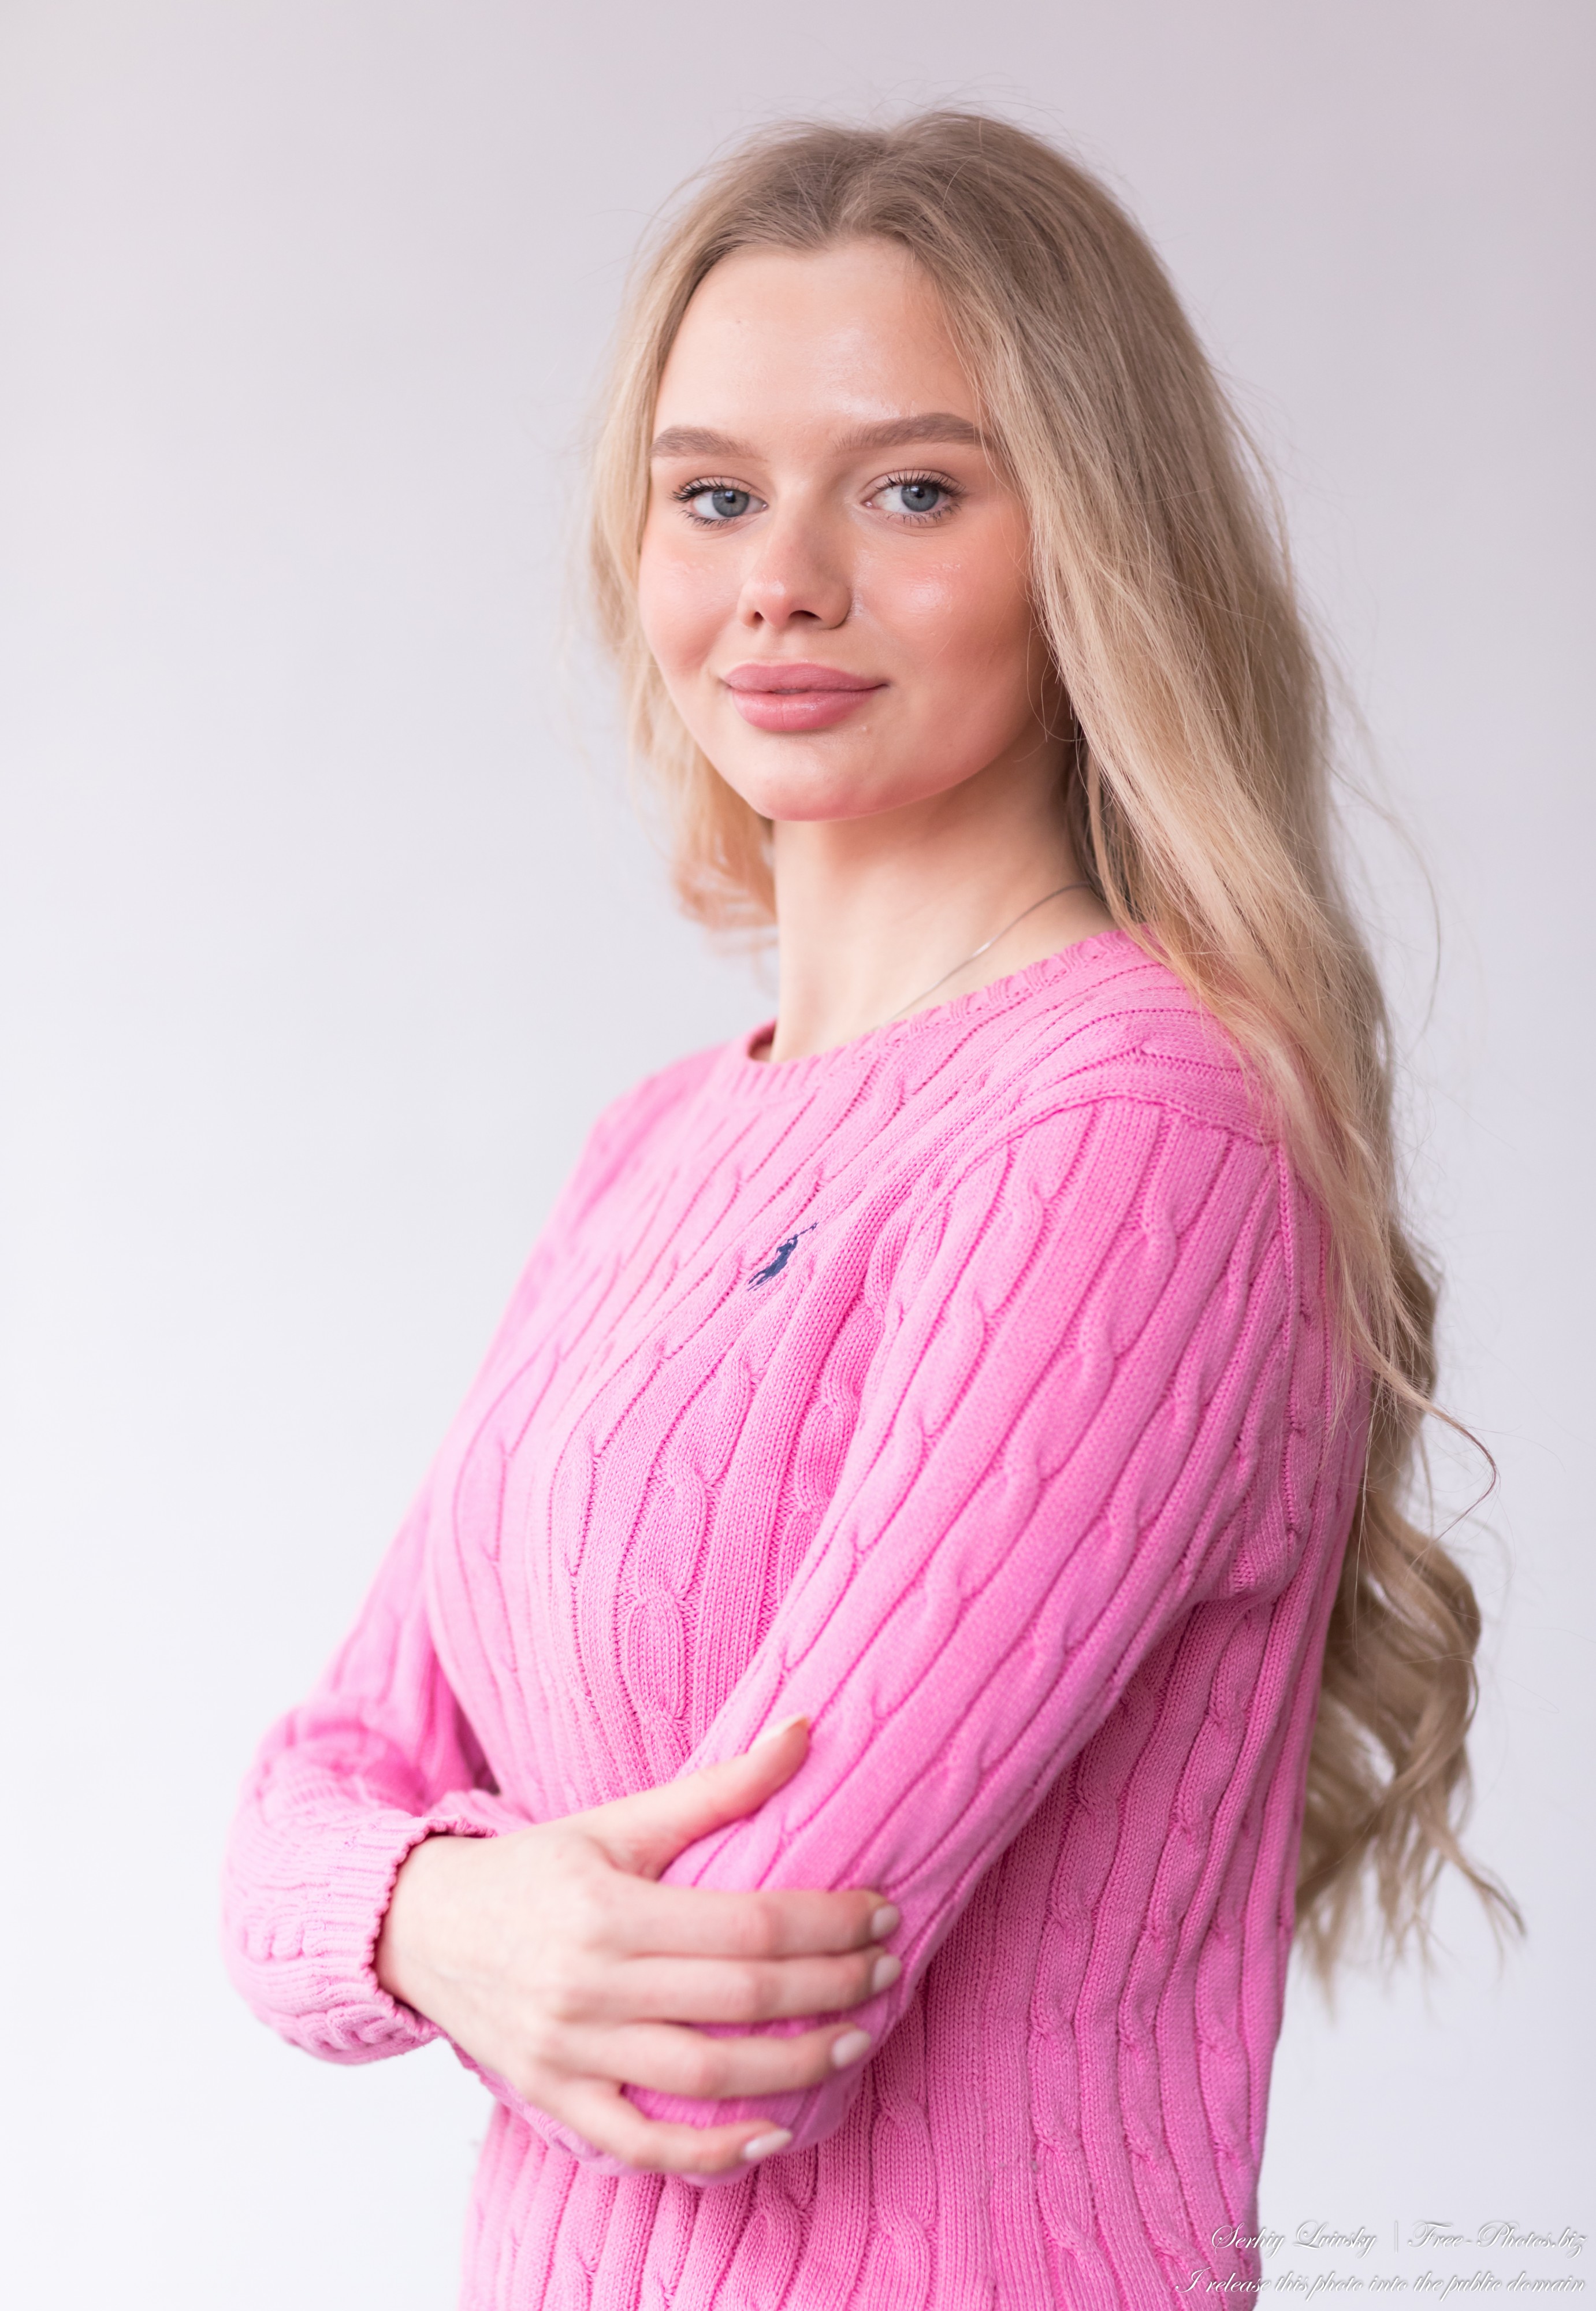 Photo Of Oksana A 19 Year Old Natural Blonde Girl Photographed By